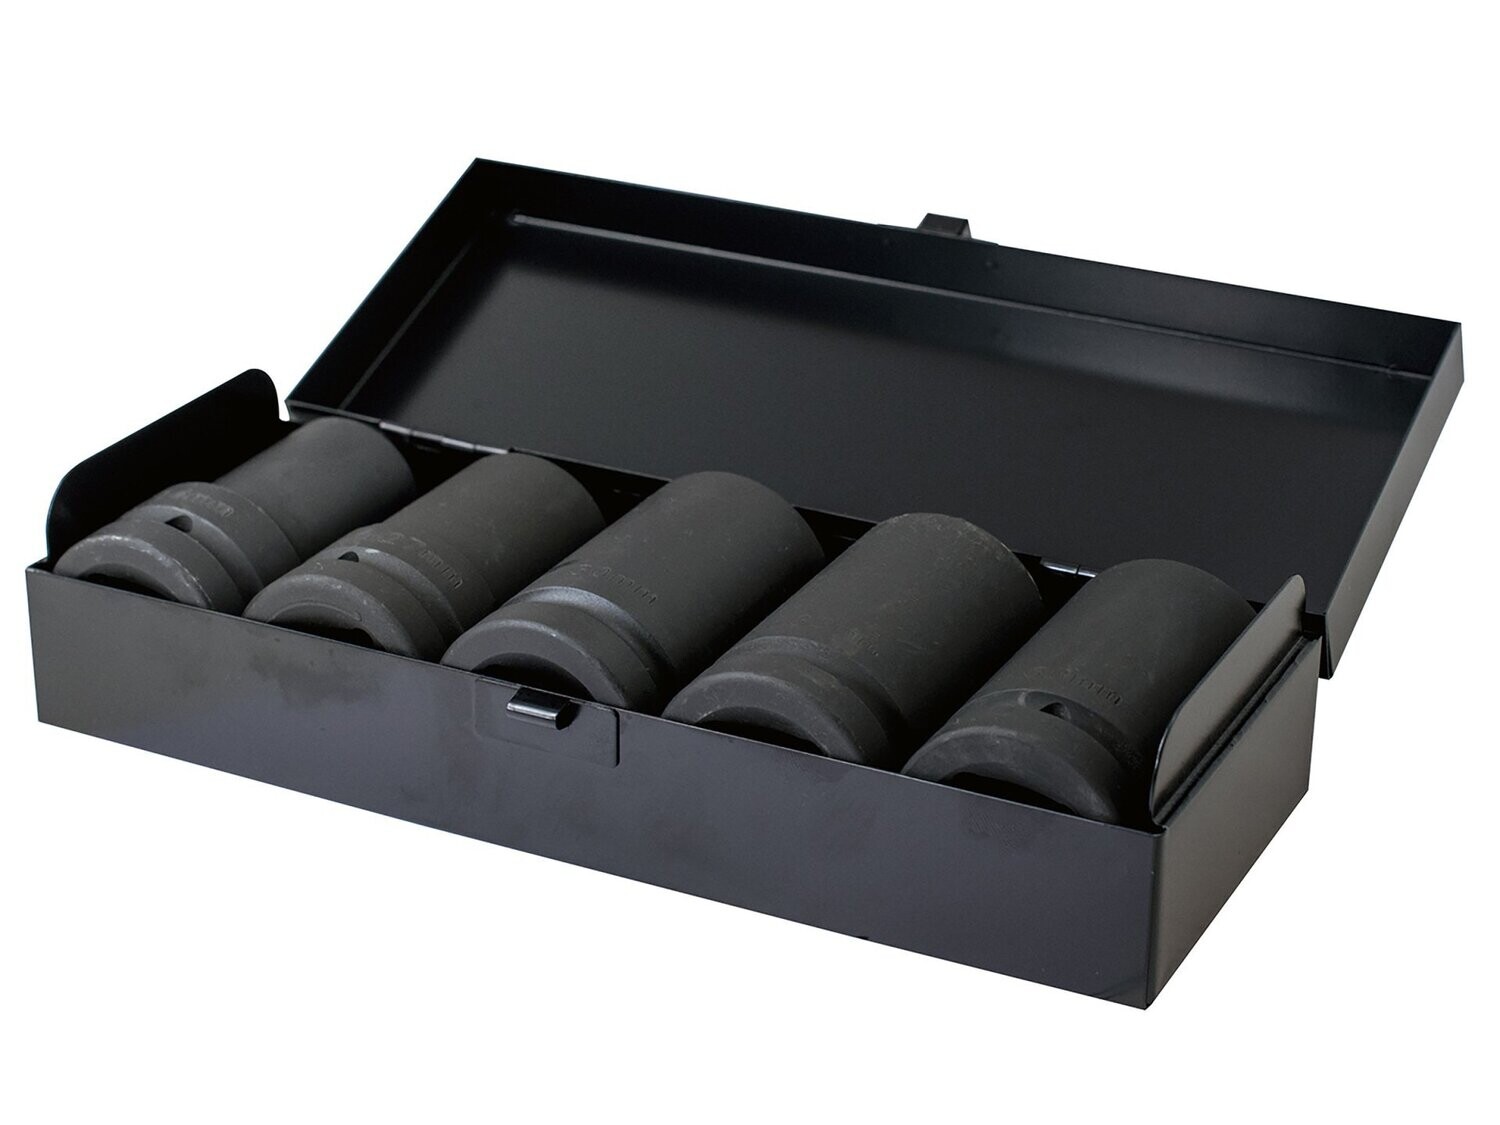 5pc 1" Deep Drive CR-MO Impact Socket Set 24,27,30,32,33mm
FREE COURIER DELIVERY